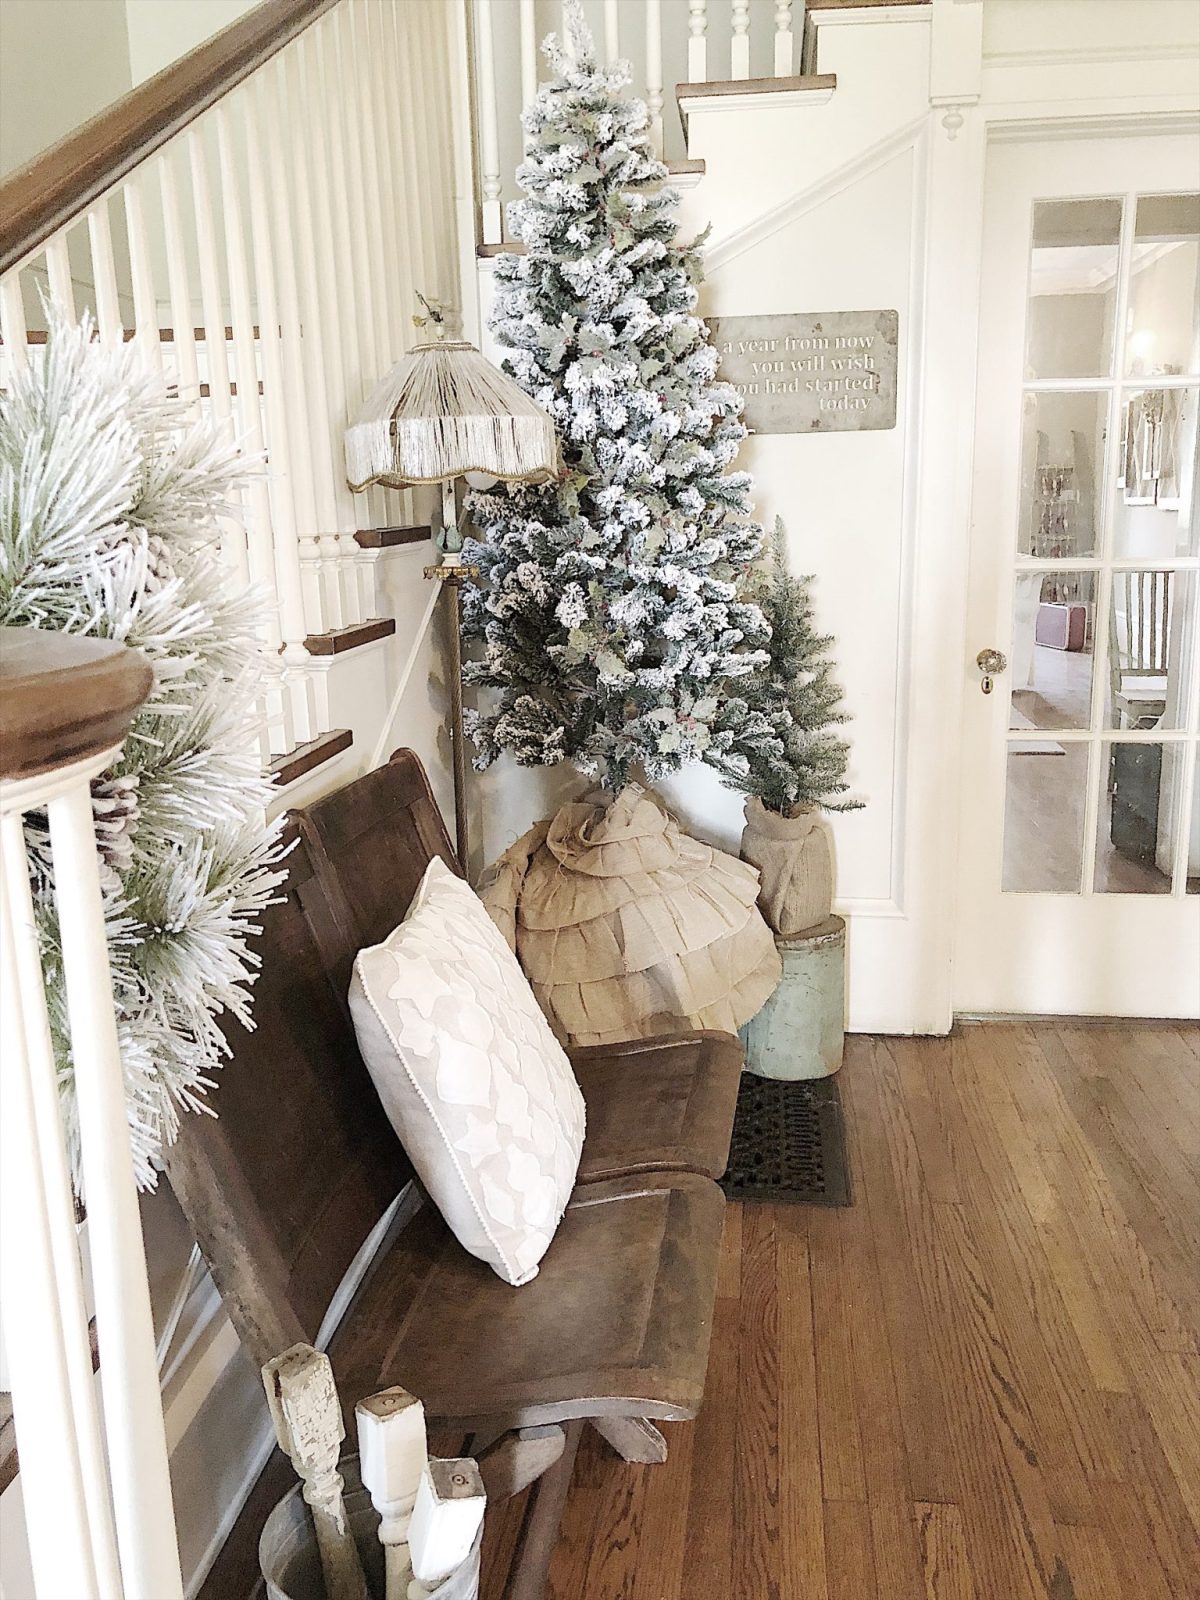 Why is Decorating For Christmas so Hard? - MY 100 YEAR OLD HOME